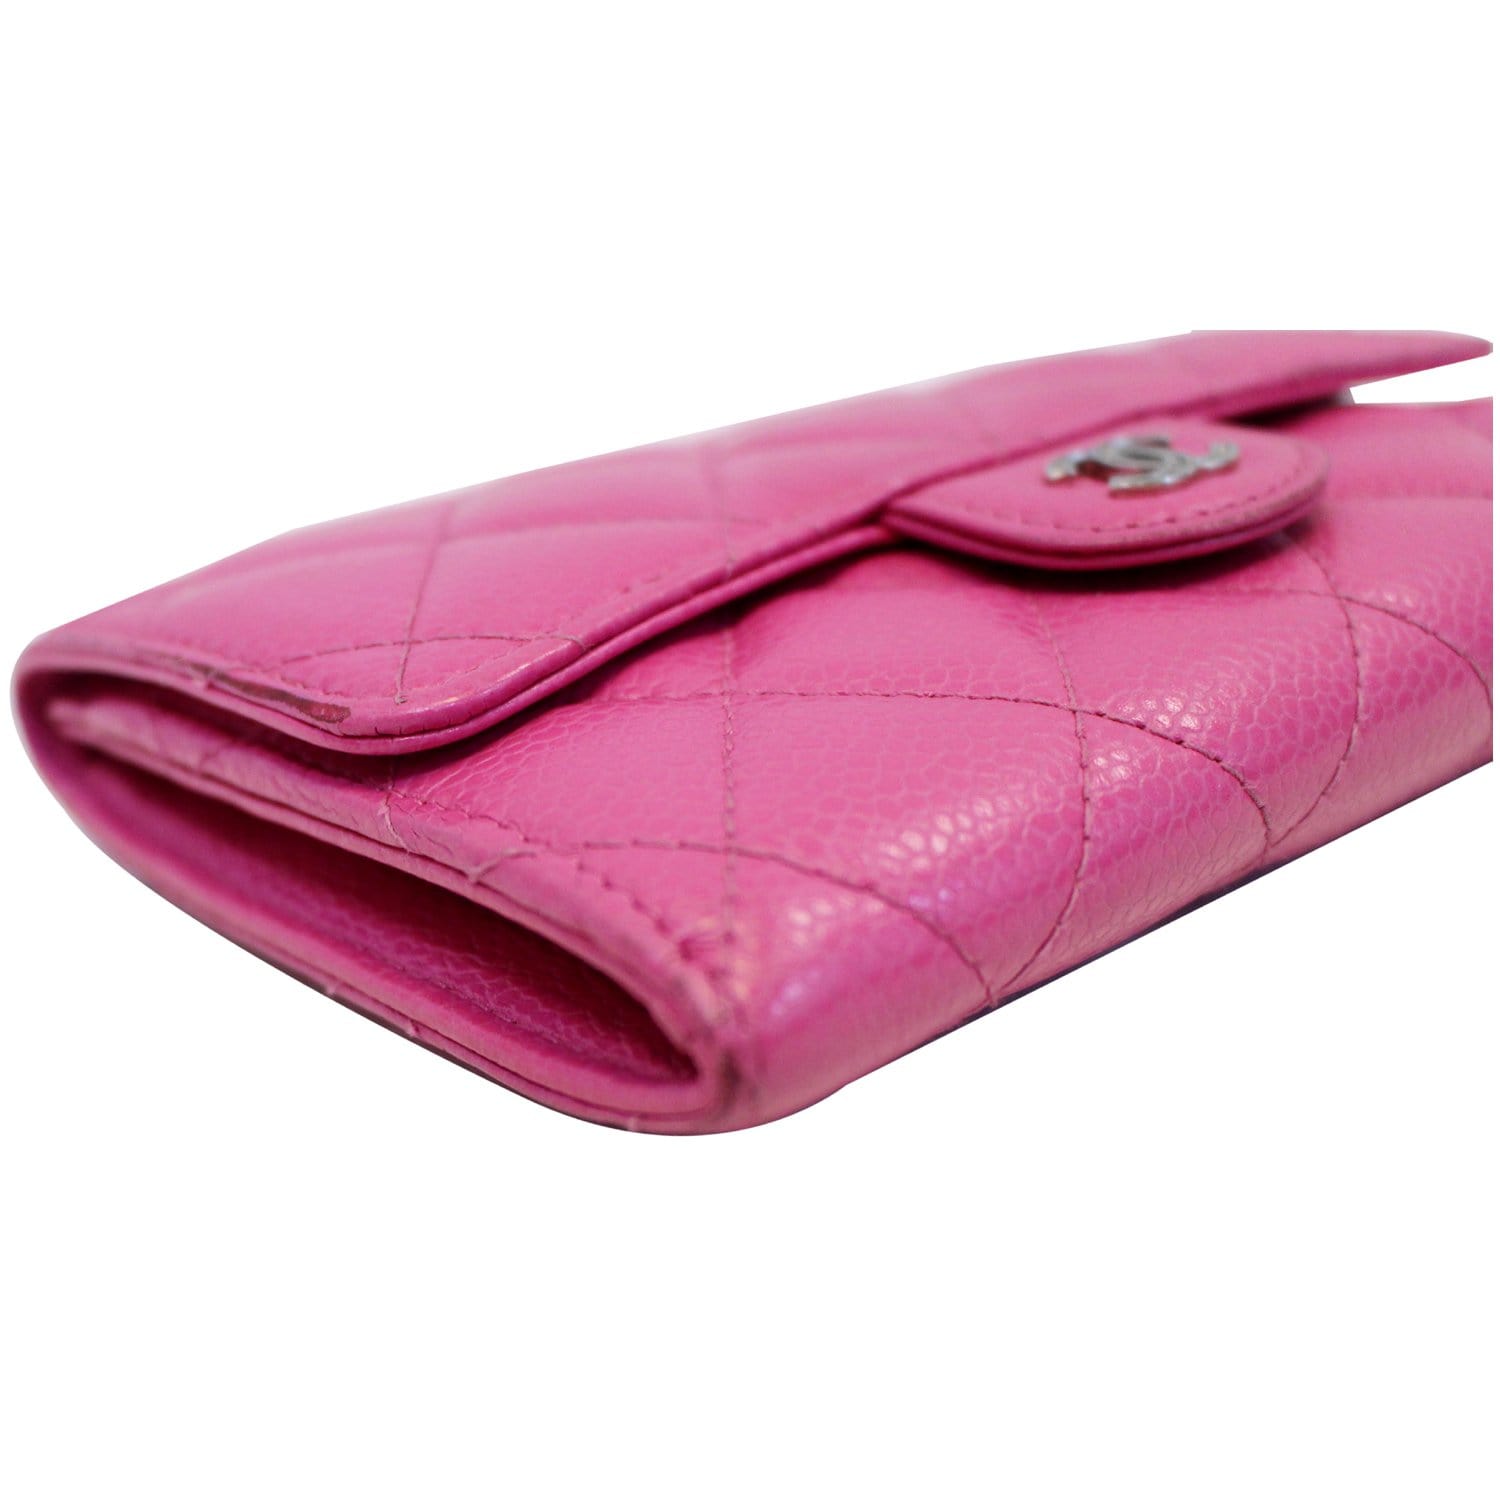 Timeless/classique leather wallet Chanel Pink in Leather - 37409049